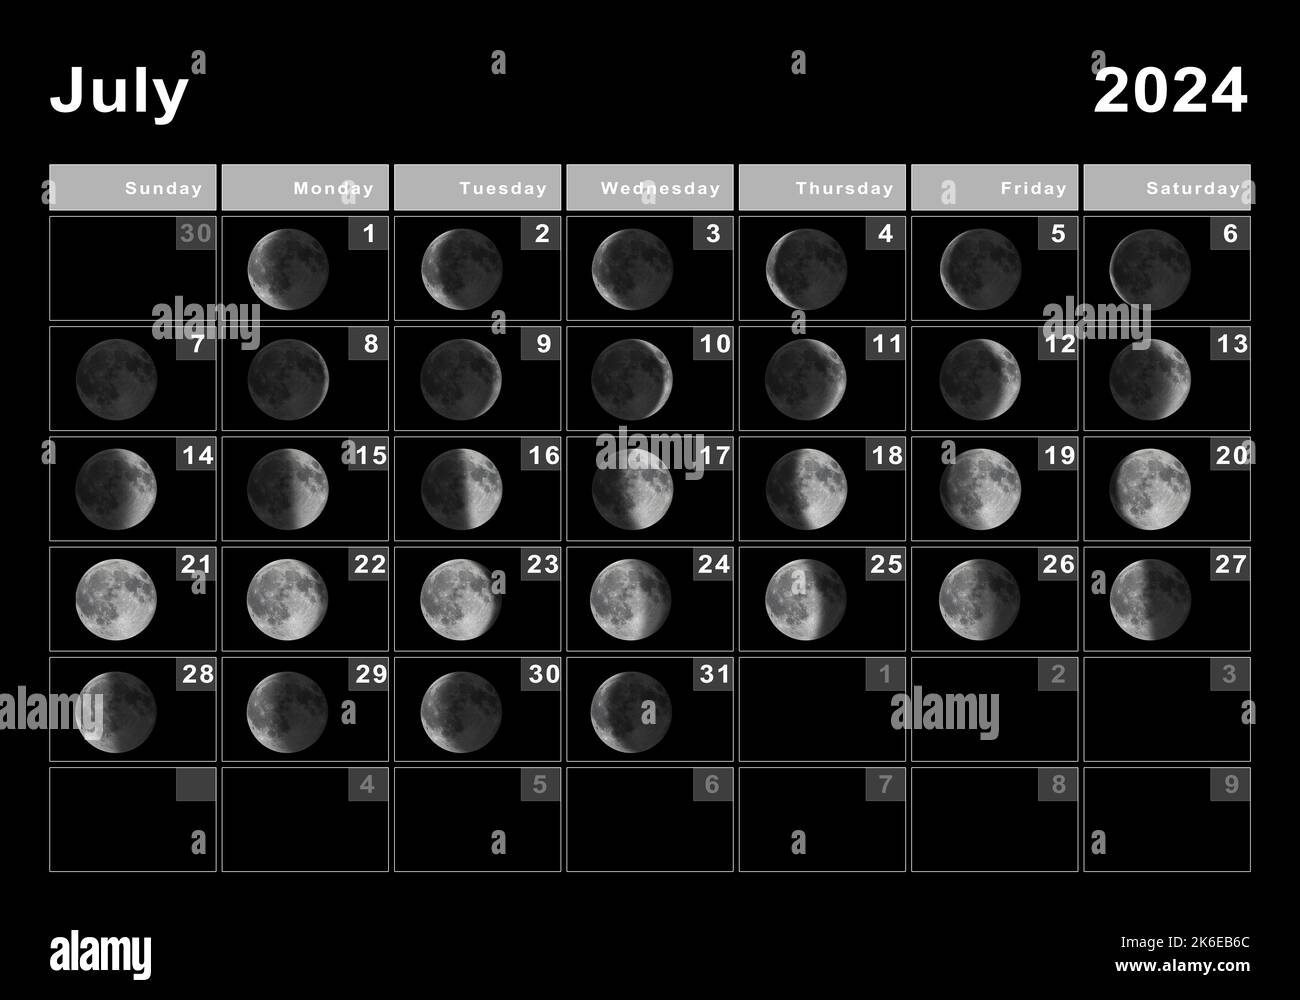 July 2024 Lunar Calendar, Moon Cycles, Moon Phases Stock Photo - Alamy with regard to July 2nd Lunar Calendar 2024